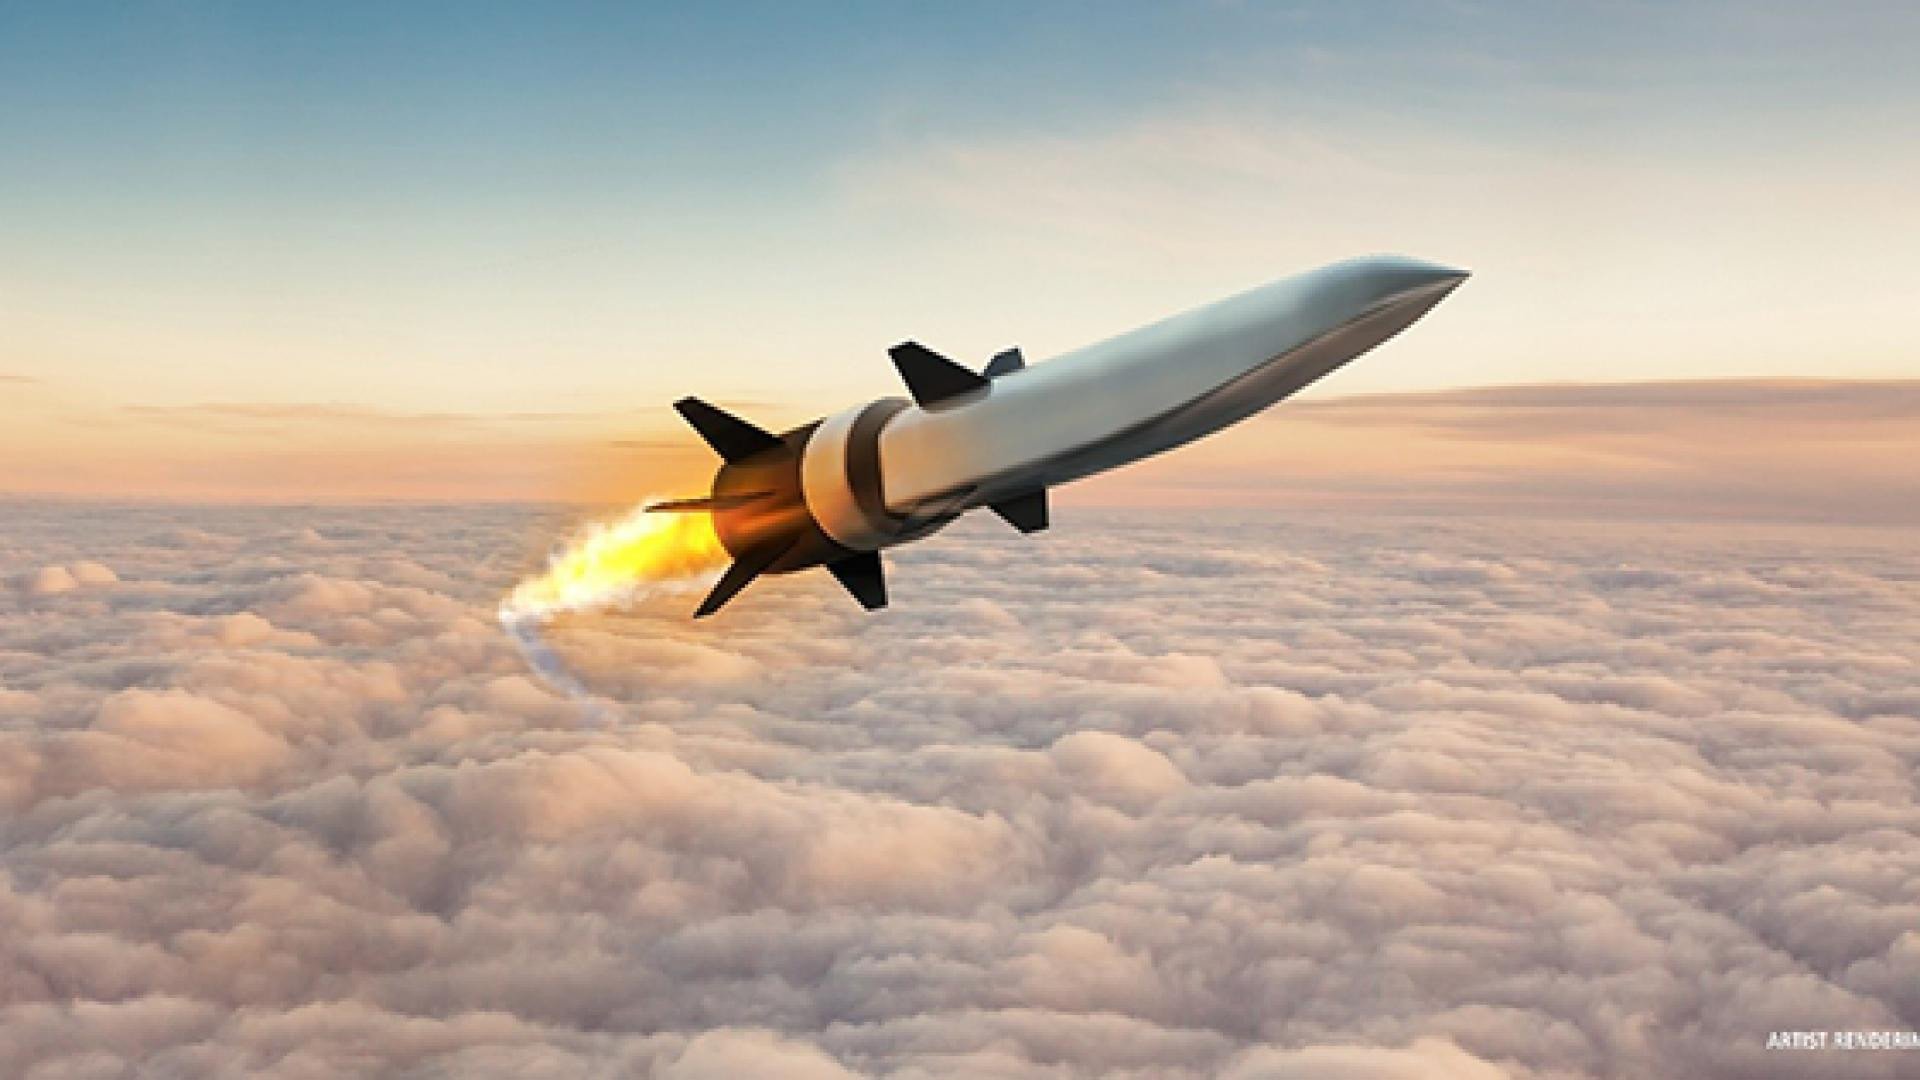 Scientists said the breakthrough could help China step up its production of hypersonic missiles. Photo: Handout